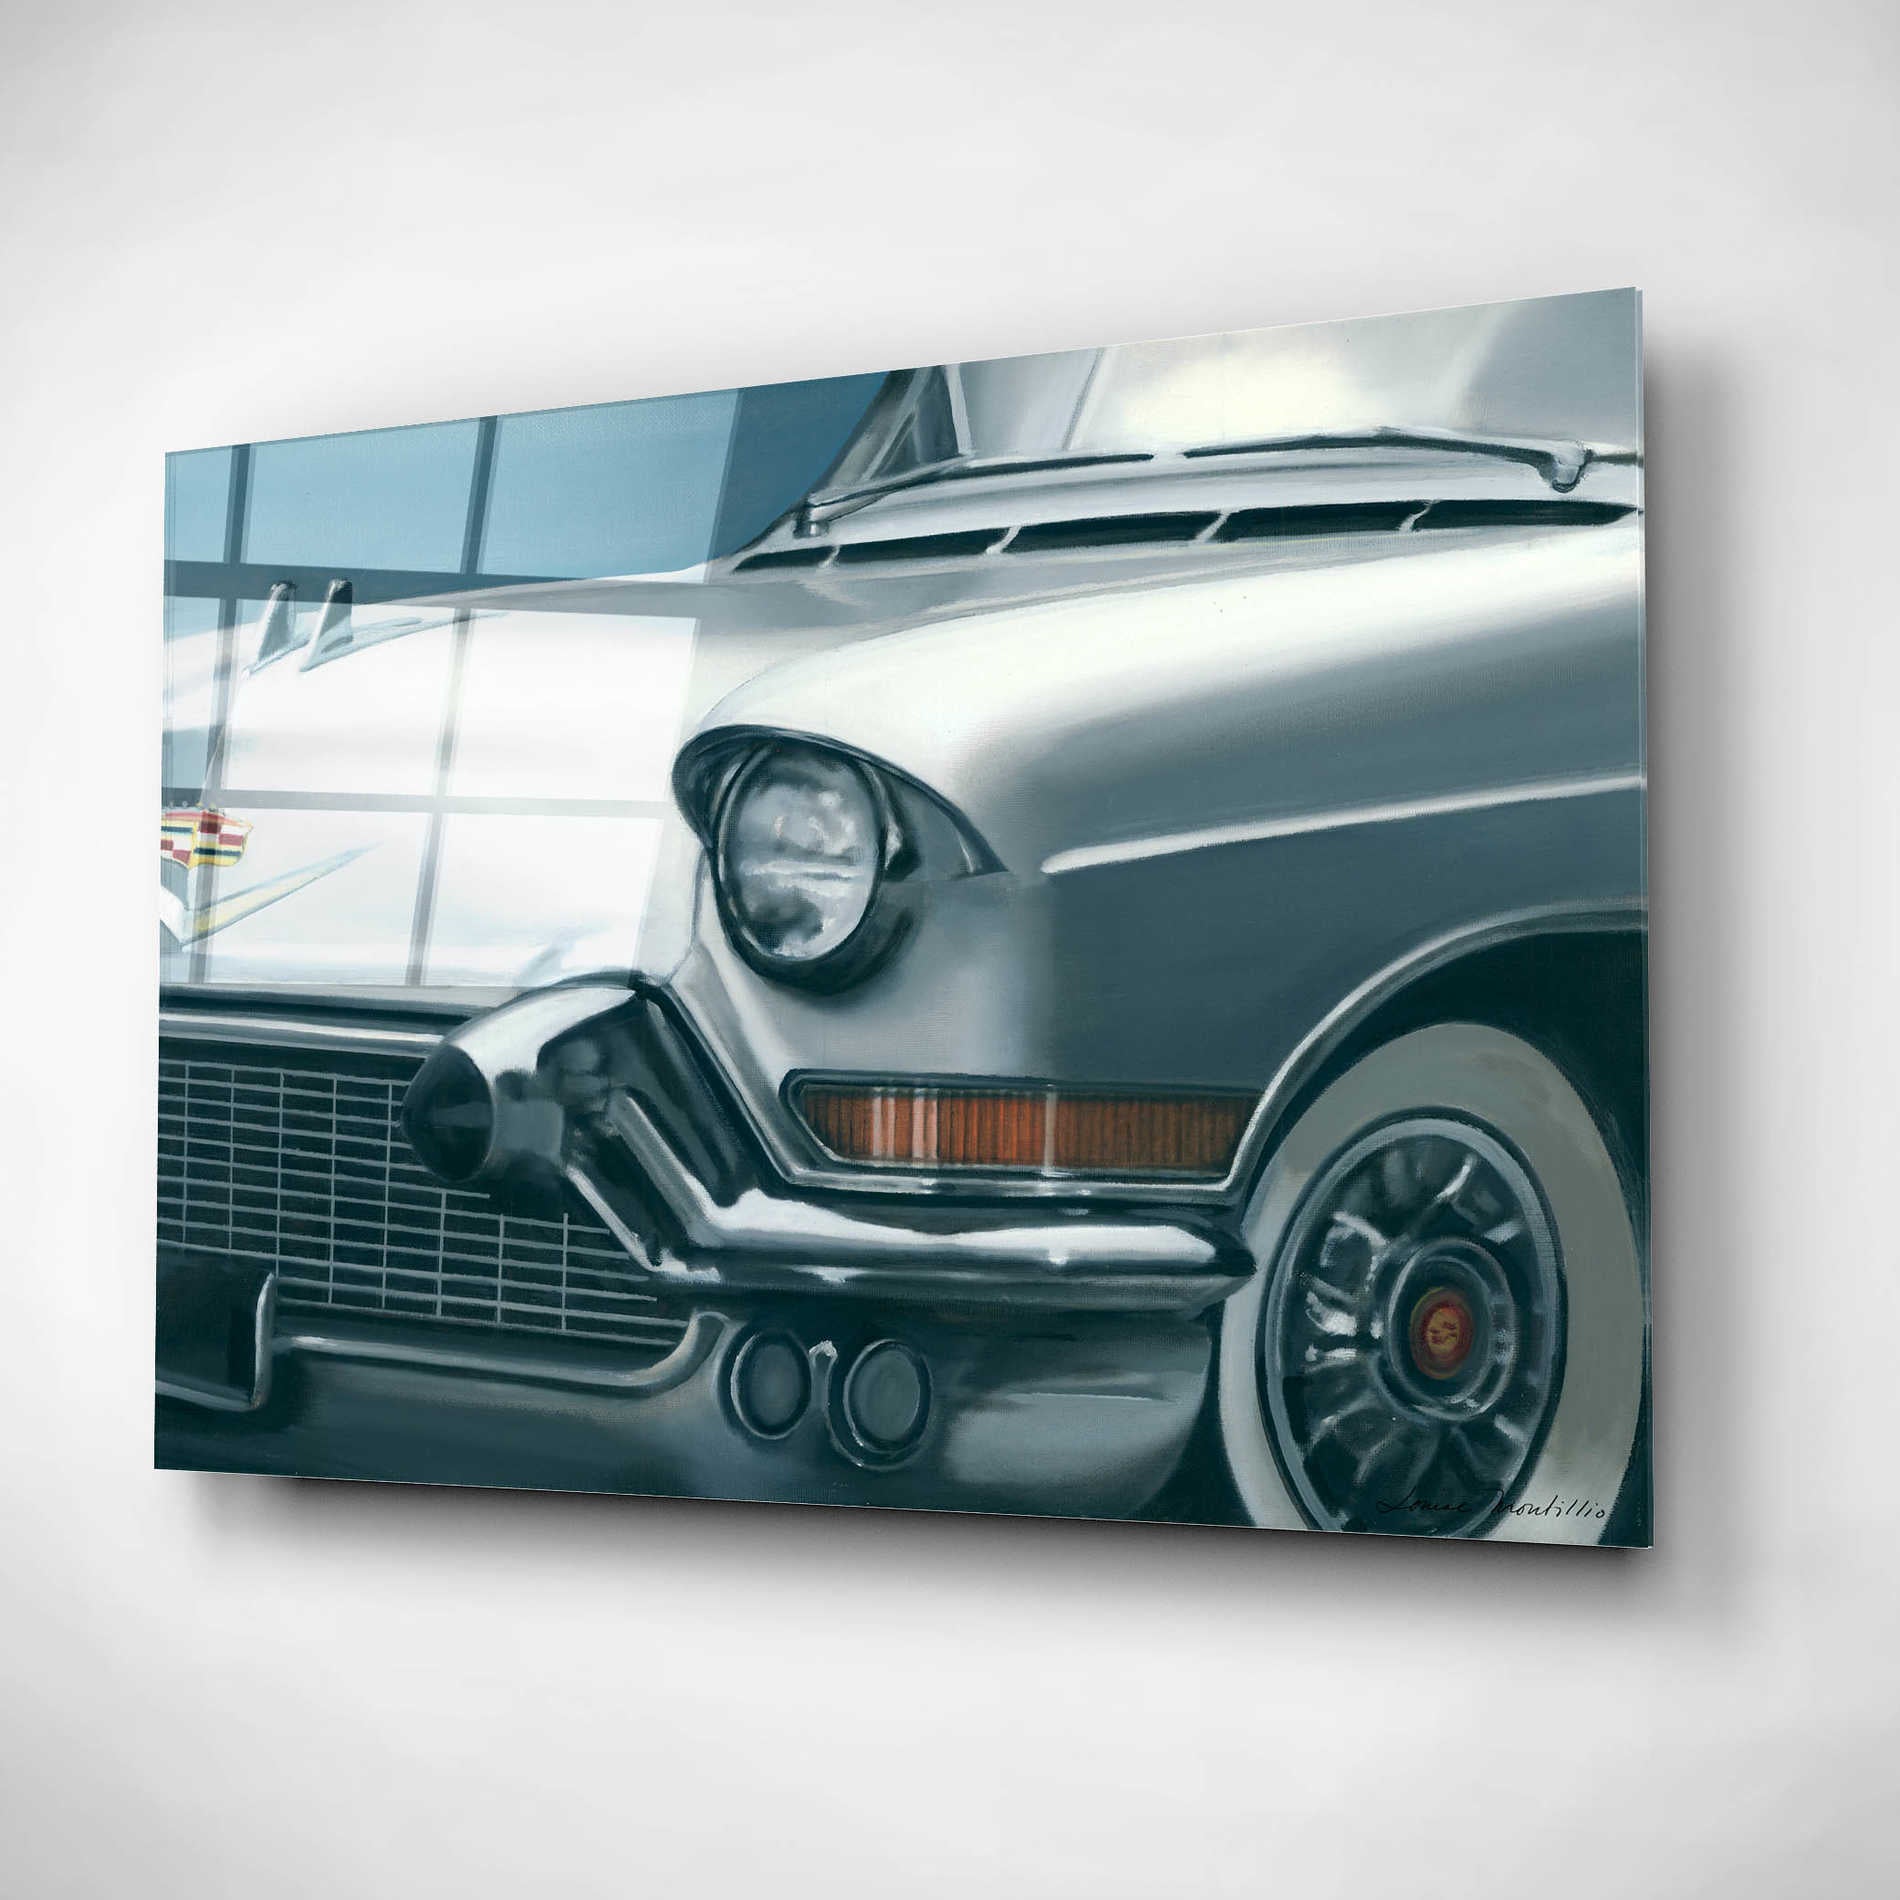 Epic Art 'Vintage Silver Caddy' by Louise Montillio, Acrylic Glass Wall Art,16x12